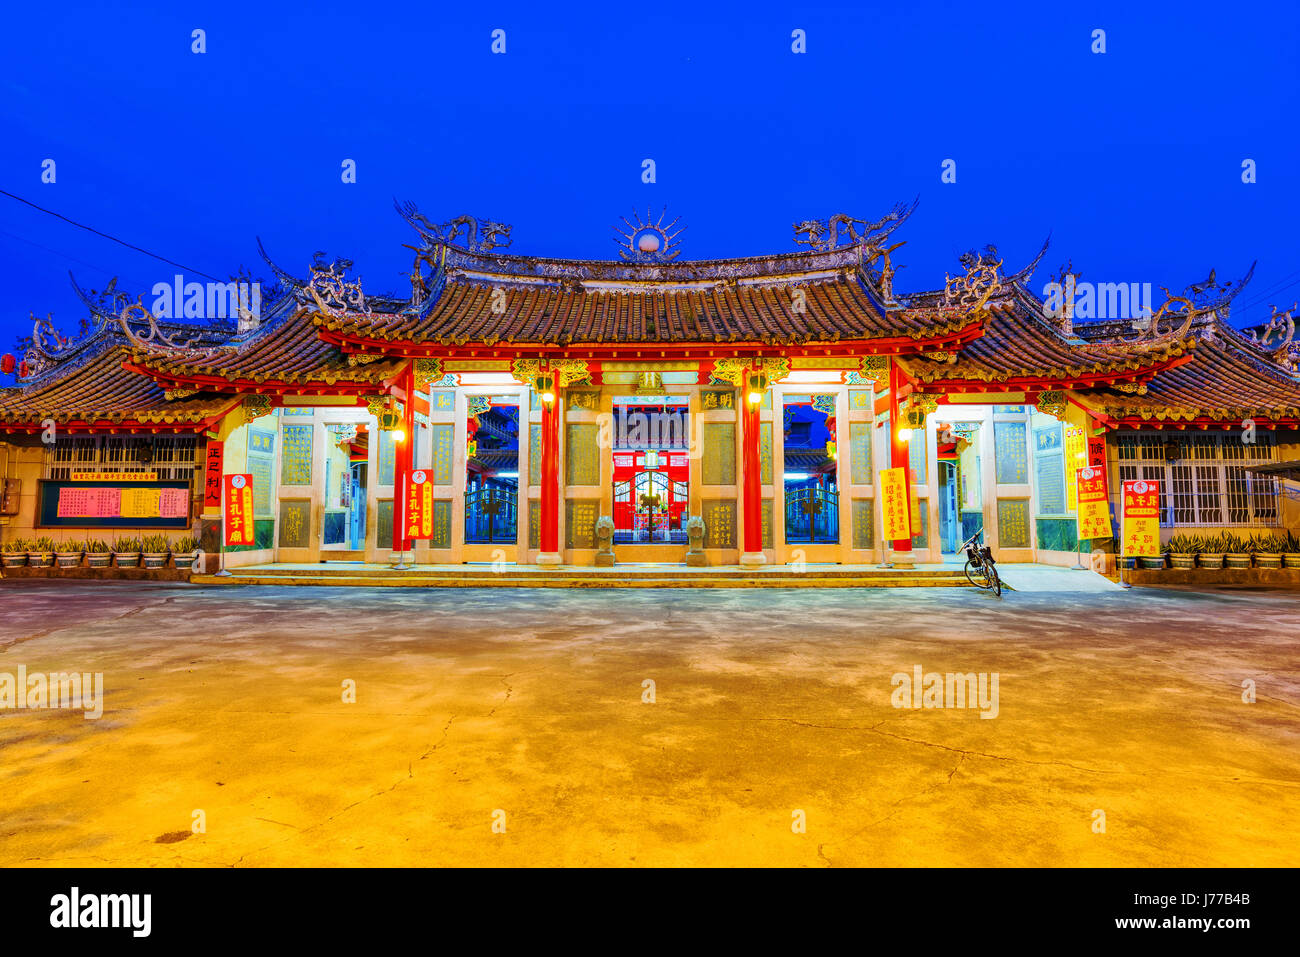 PULI, TAIWAN - MAY 05: This is the Confucius temple a popular traditional buddhist temple where many local Taiwanese people visit on May 05, 2017 in P Stock Photo